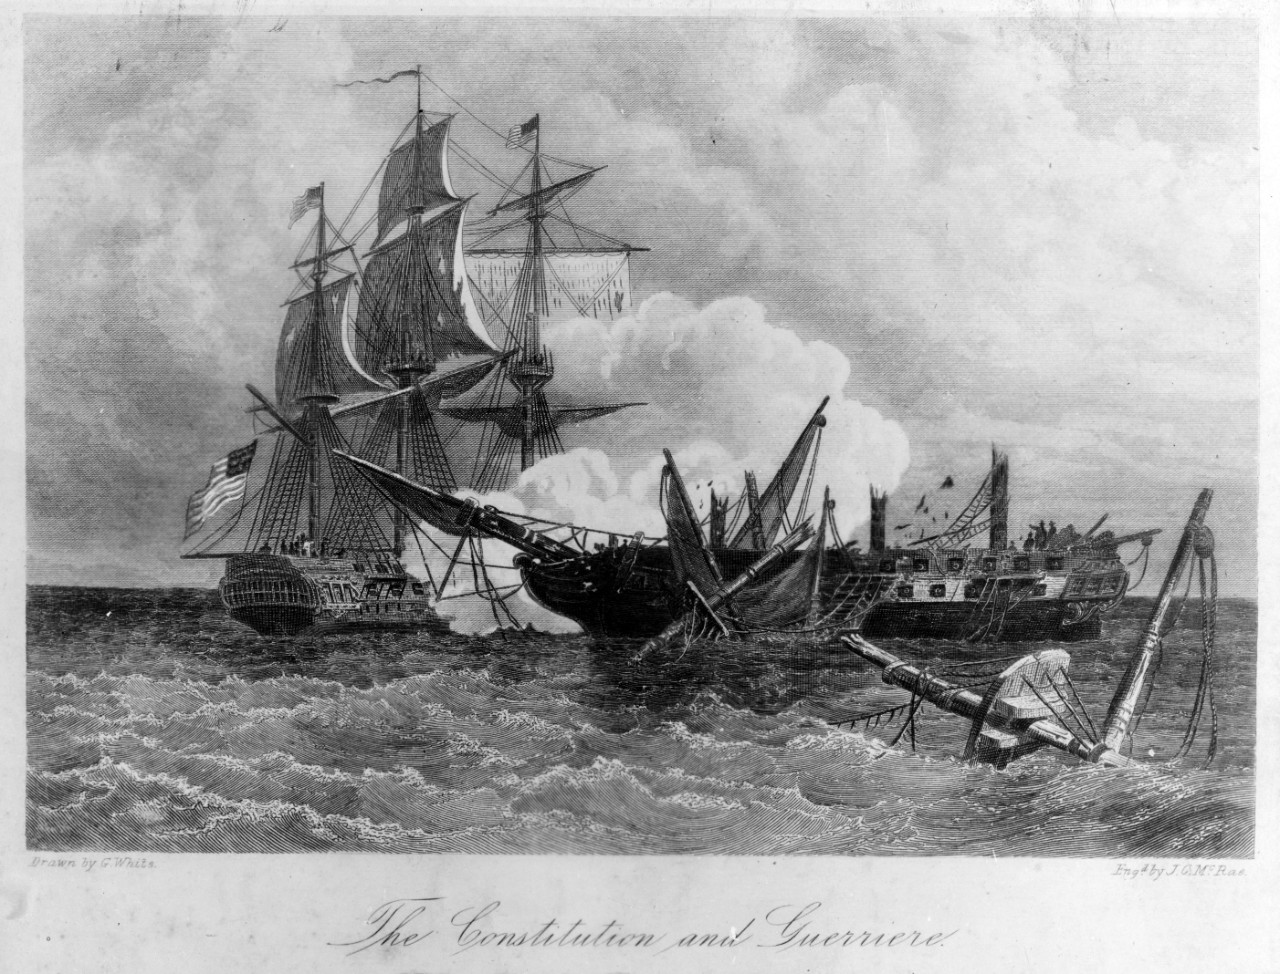 Photo #: NH 55422  Battle between USS Constitution and HMS Guerriere, 19 August 1812